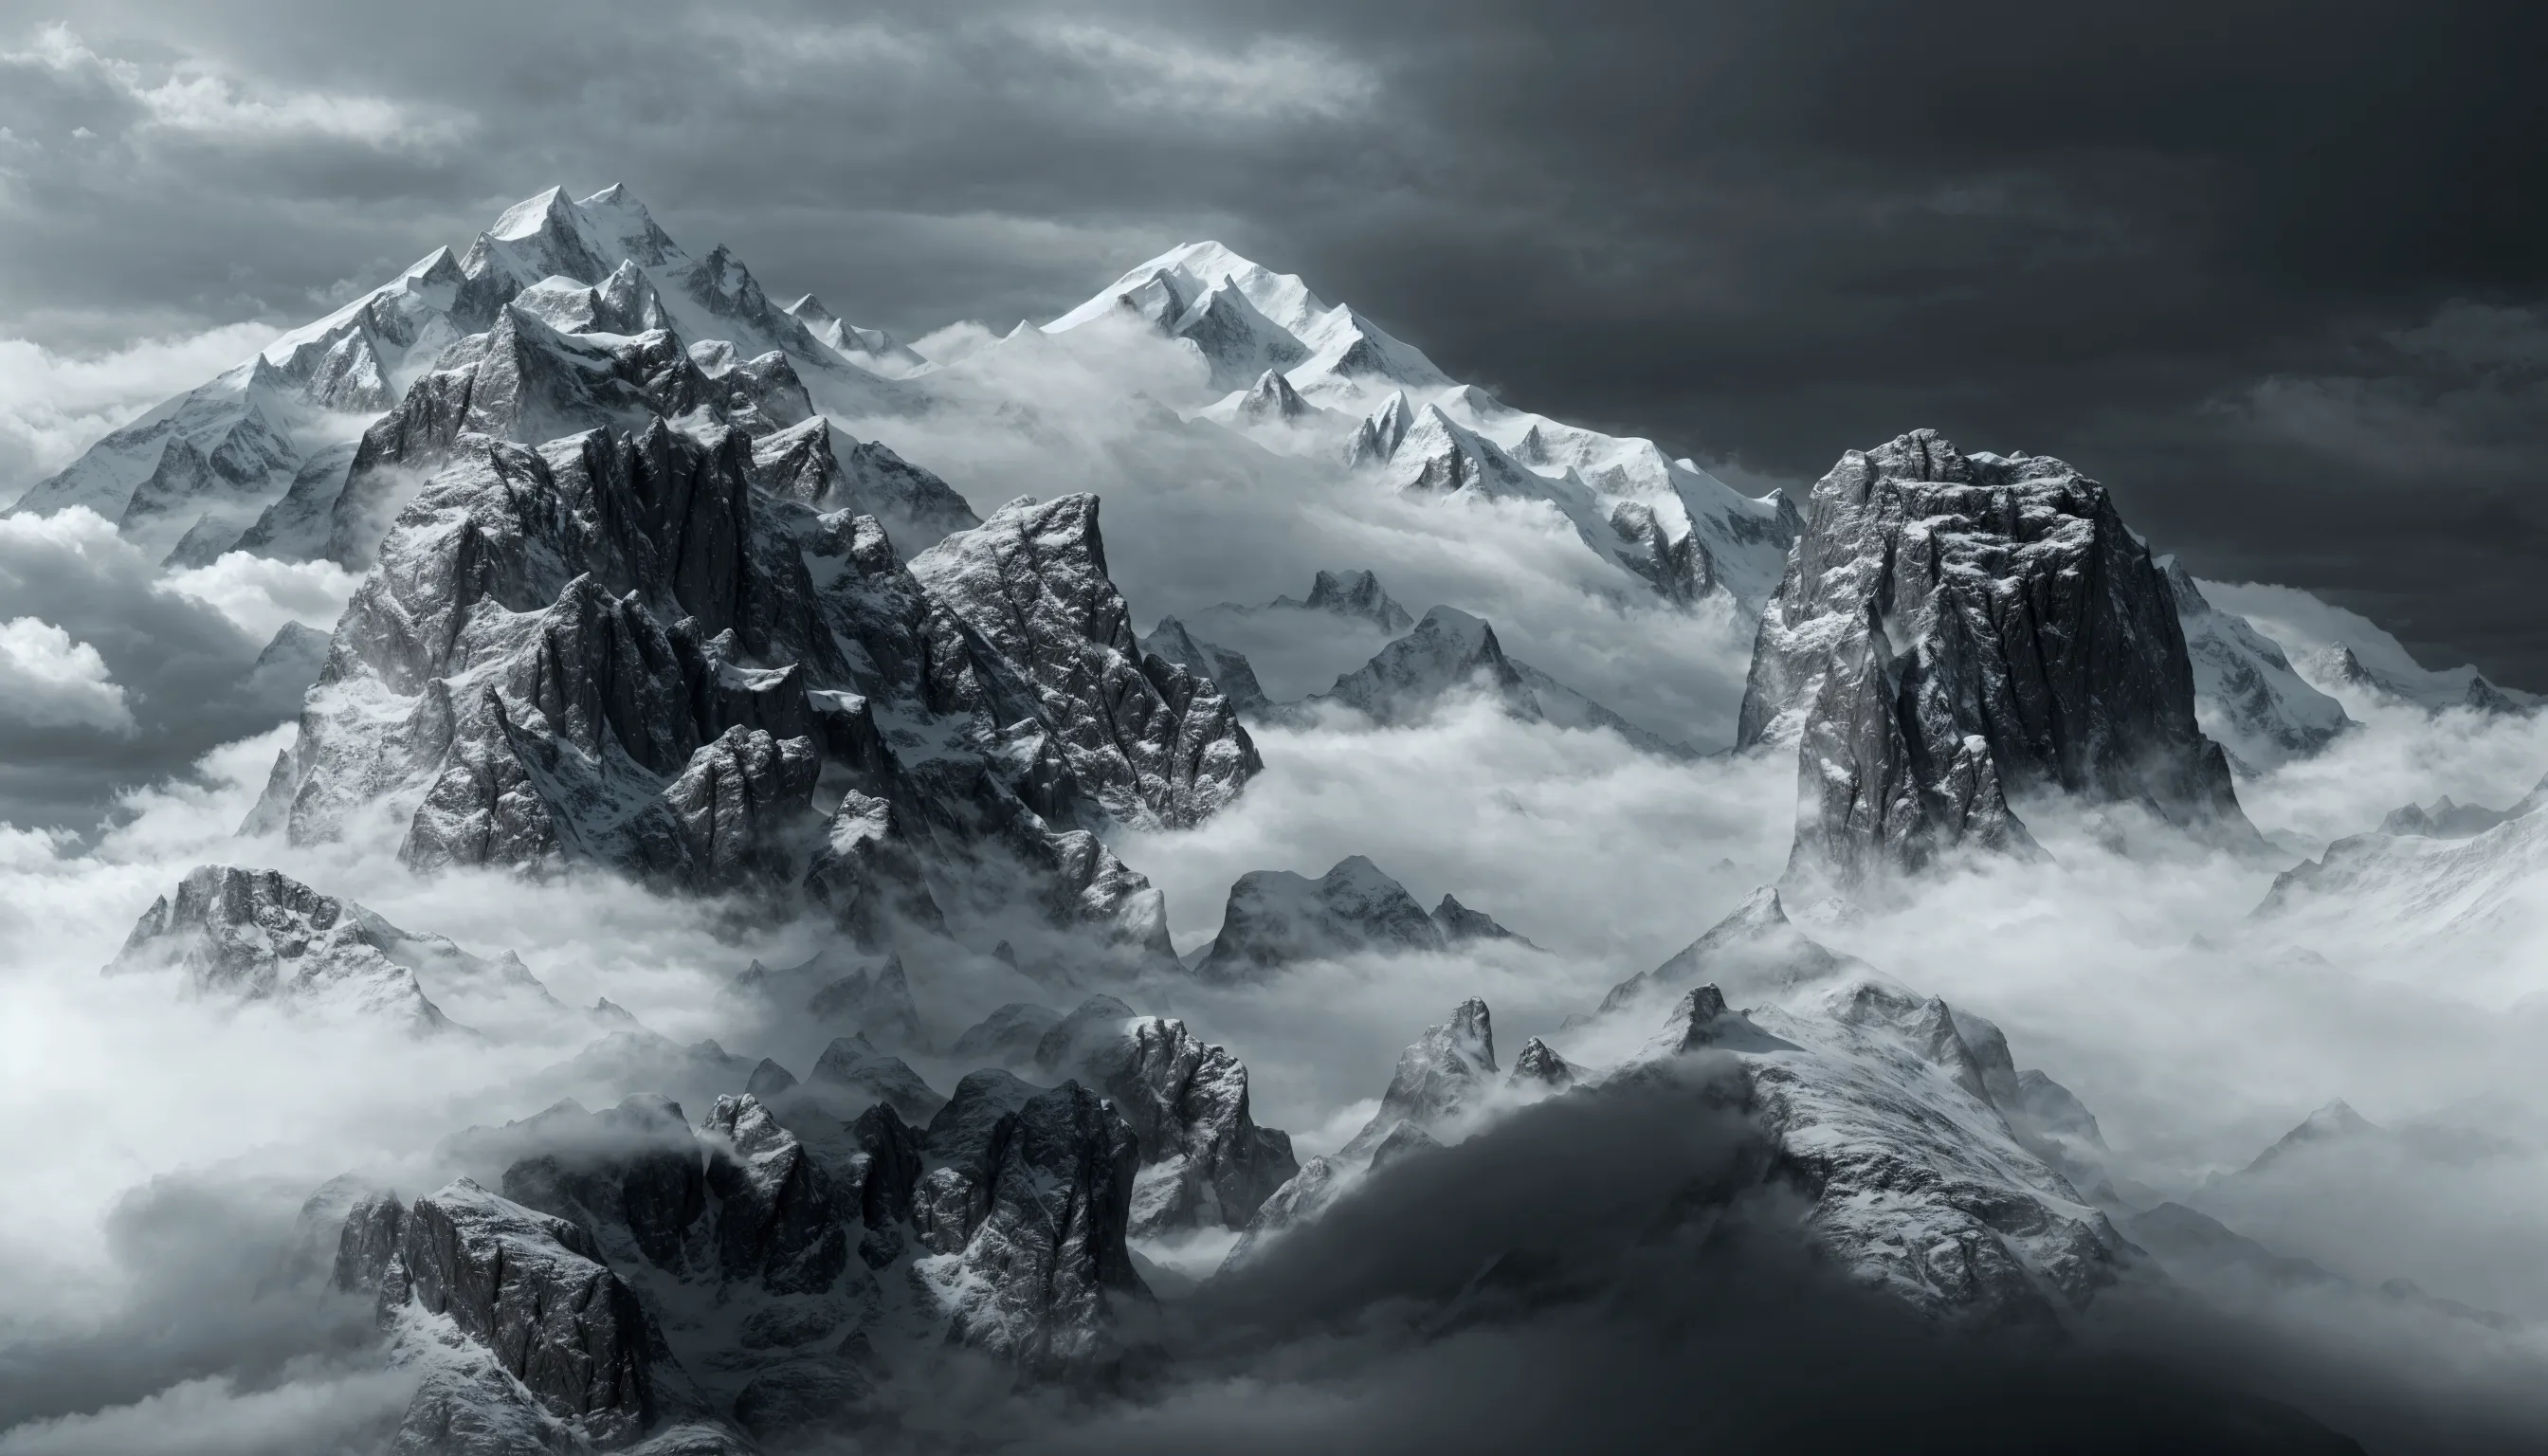 There is a black and white photo，Photo of clouds and mountains, Ethereal Landscape, in a Surreal dream landscape, Surreal frozen...